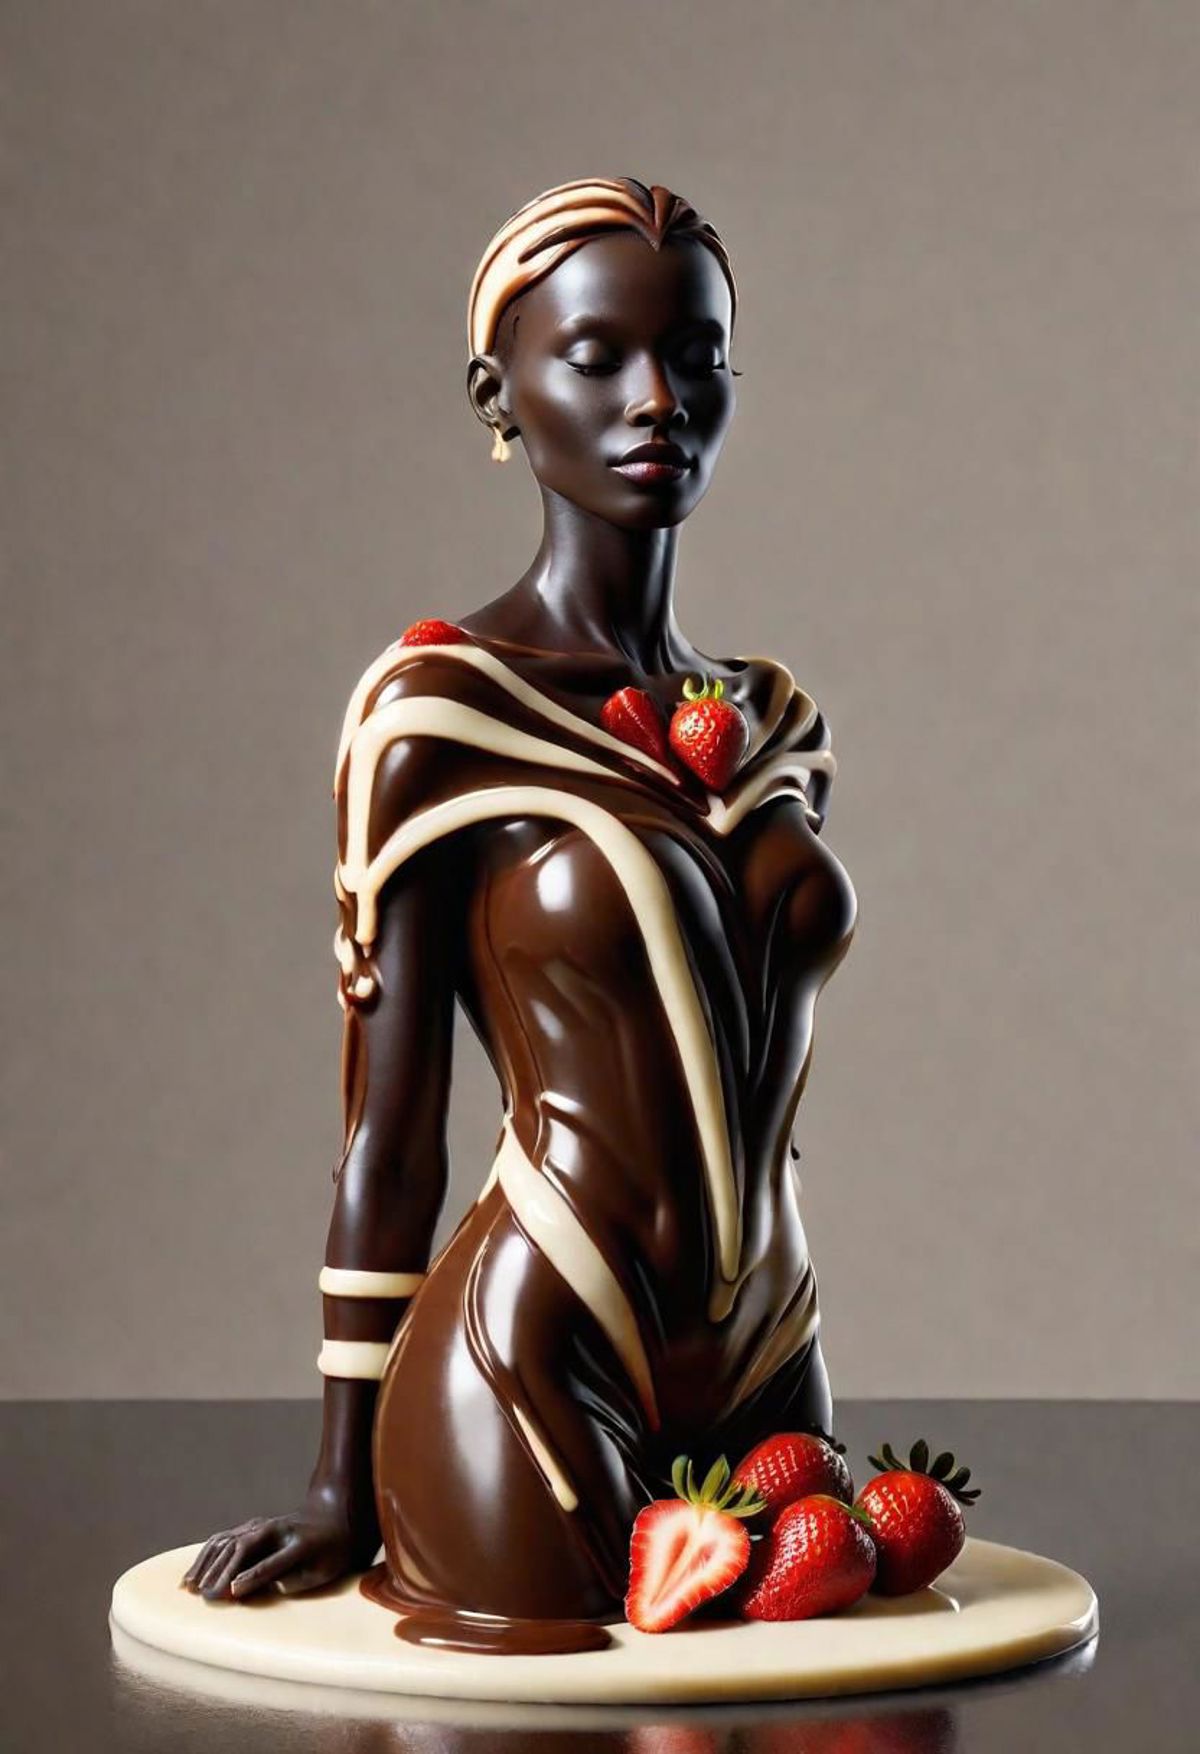 Chocolate Statue of a Woman with Strawberries on Her Chest.